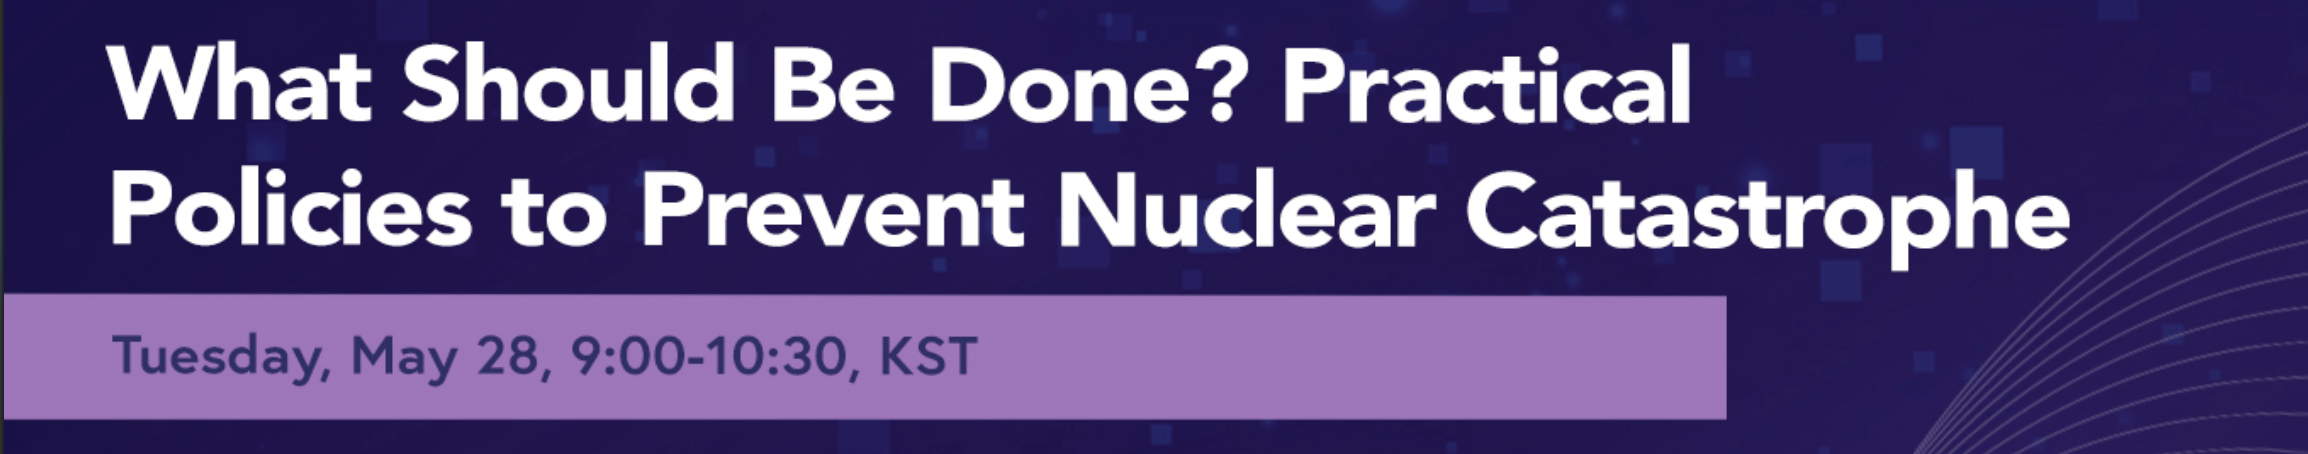 [Report Launch] What Should Be Done? Practical Policies to Prevent Nuclear Catastrophe | May 28, 2024 from 9:00am to 10:30am KST.